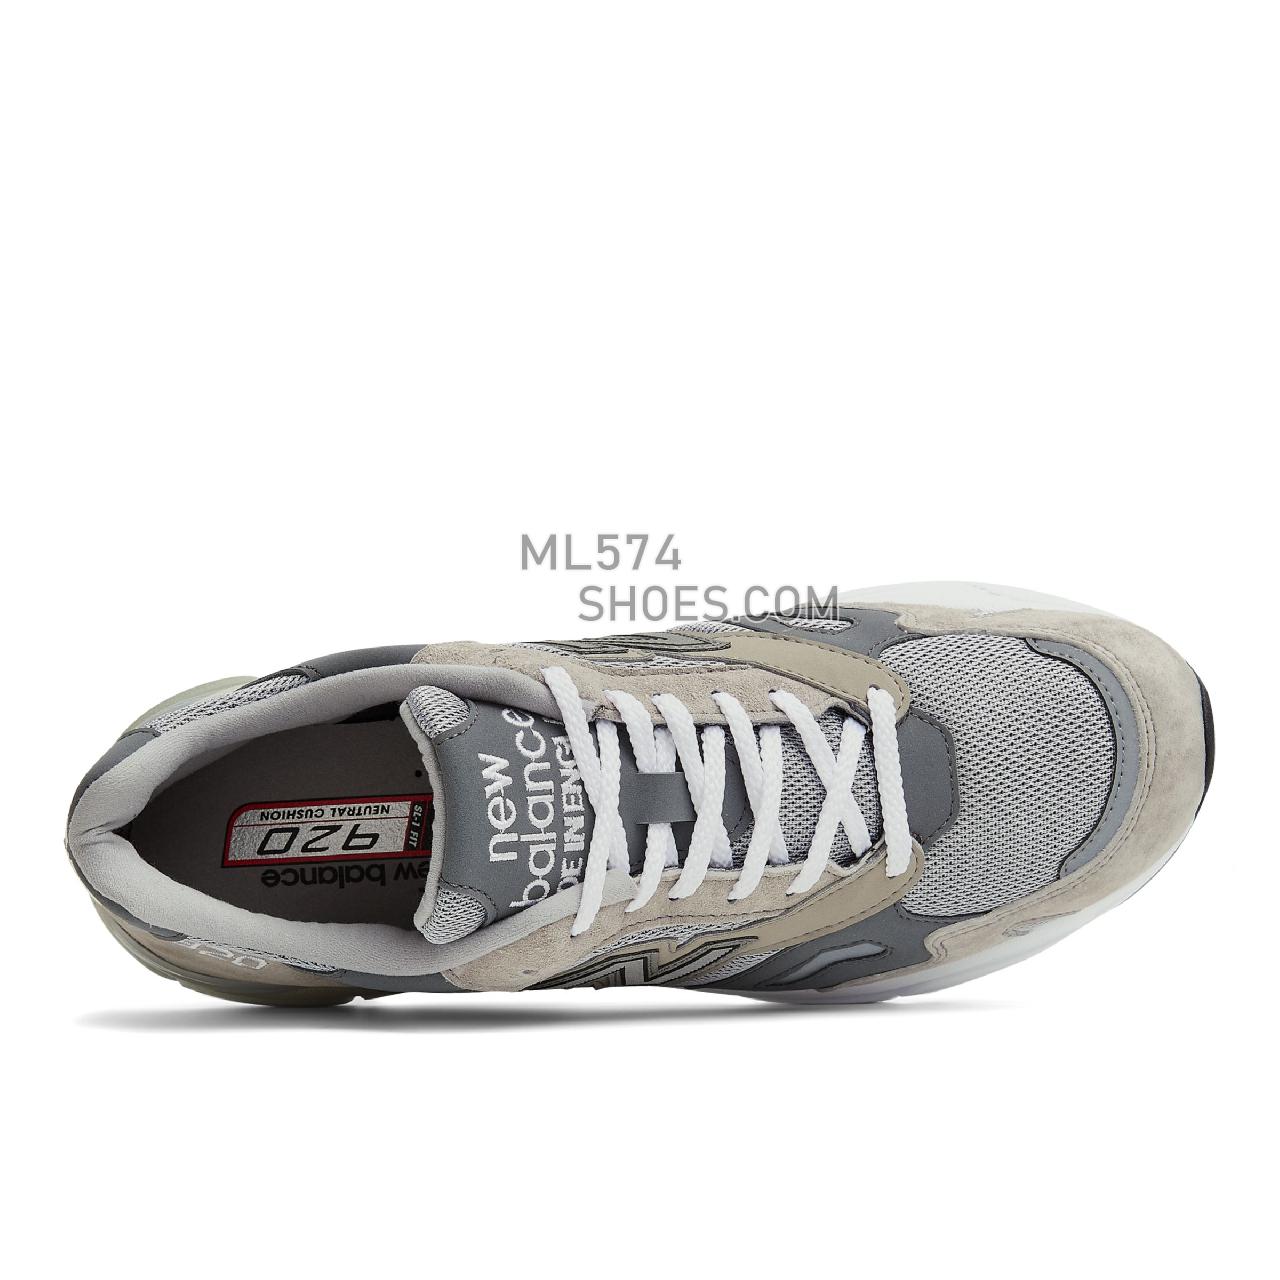 New Balance Made in UK 920 - Men's Made in USA And UK Sneakers - Grey with Dark Grey and White - M920GRY